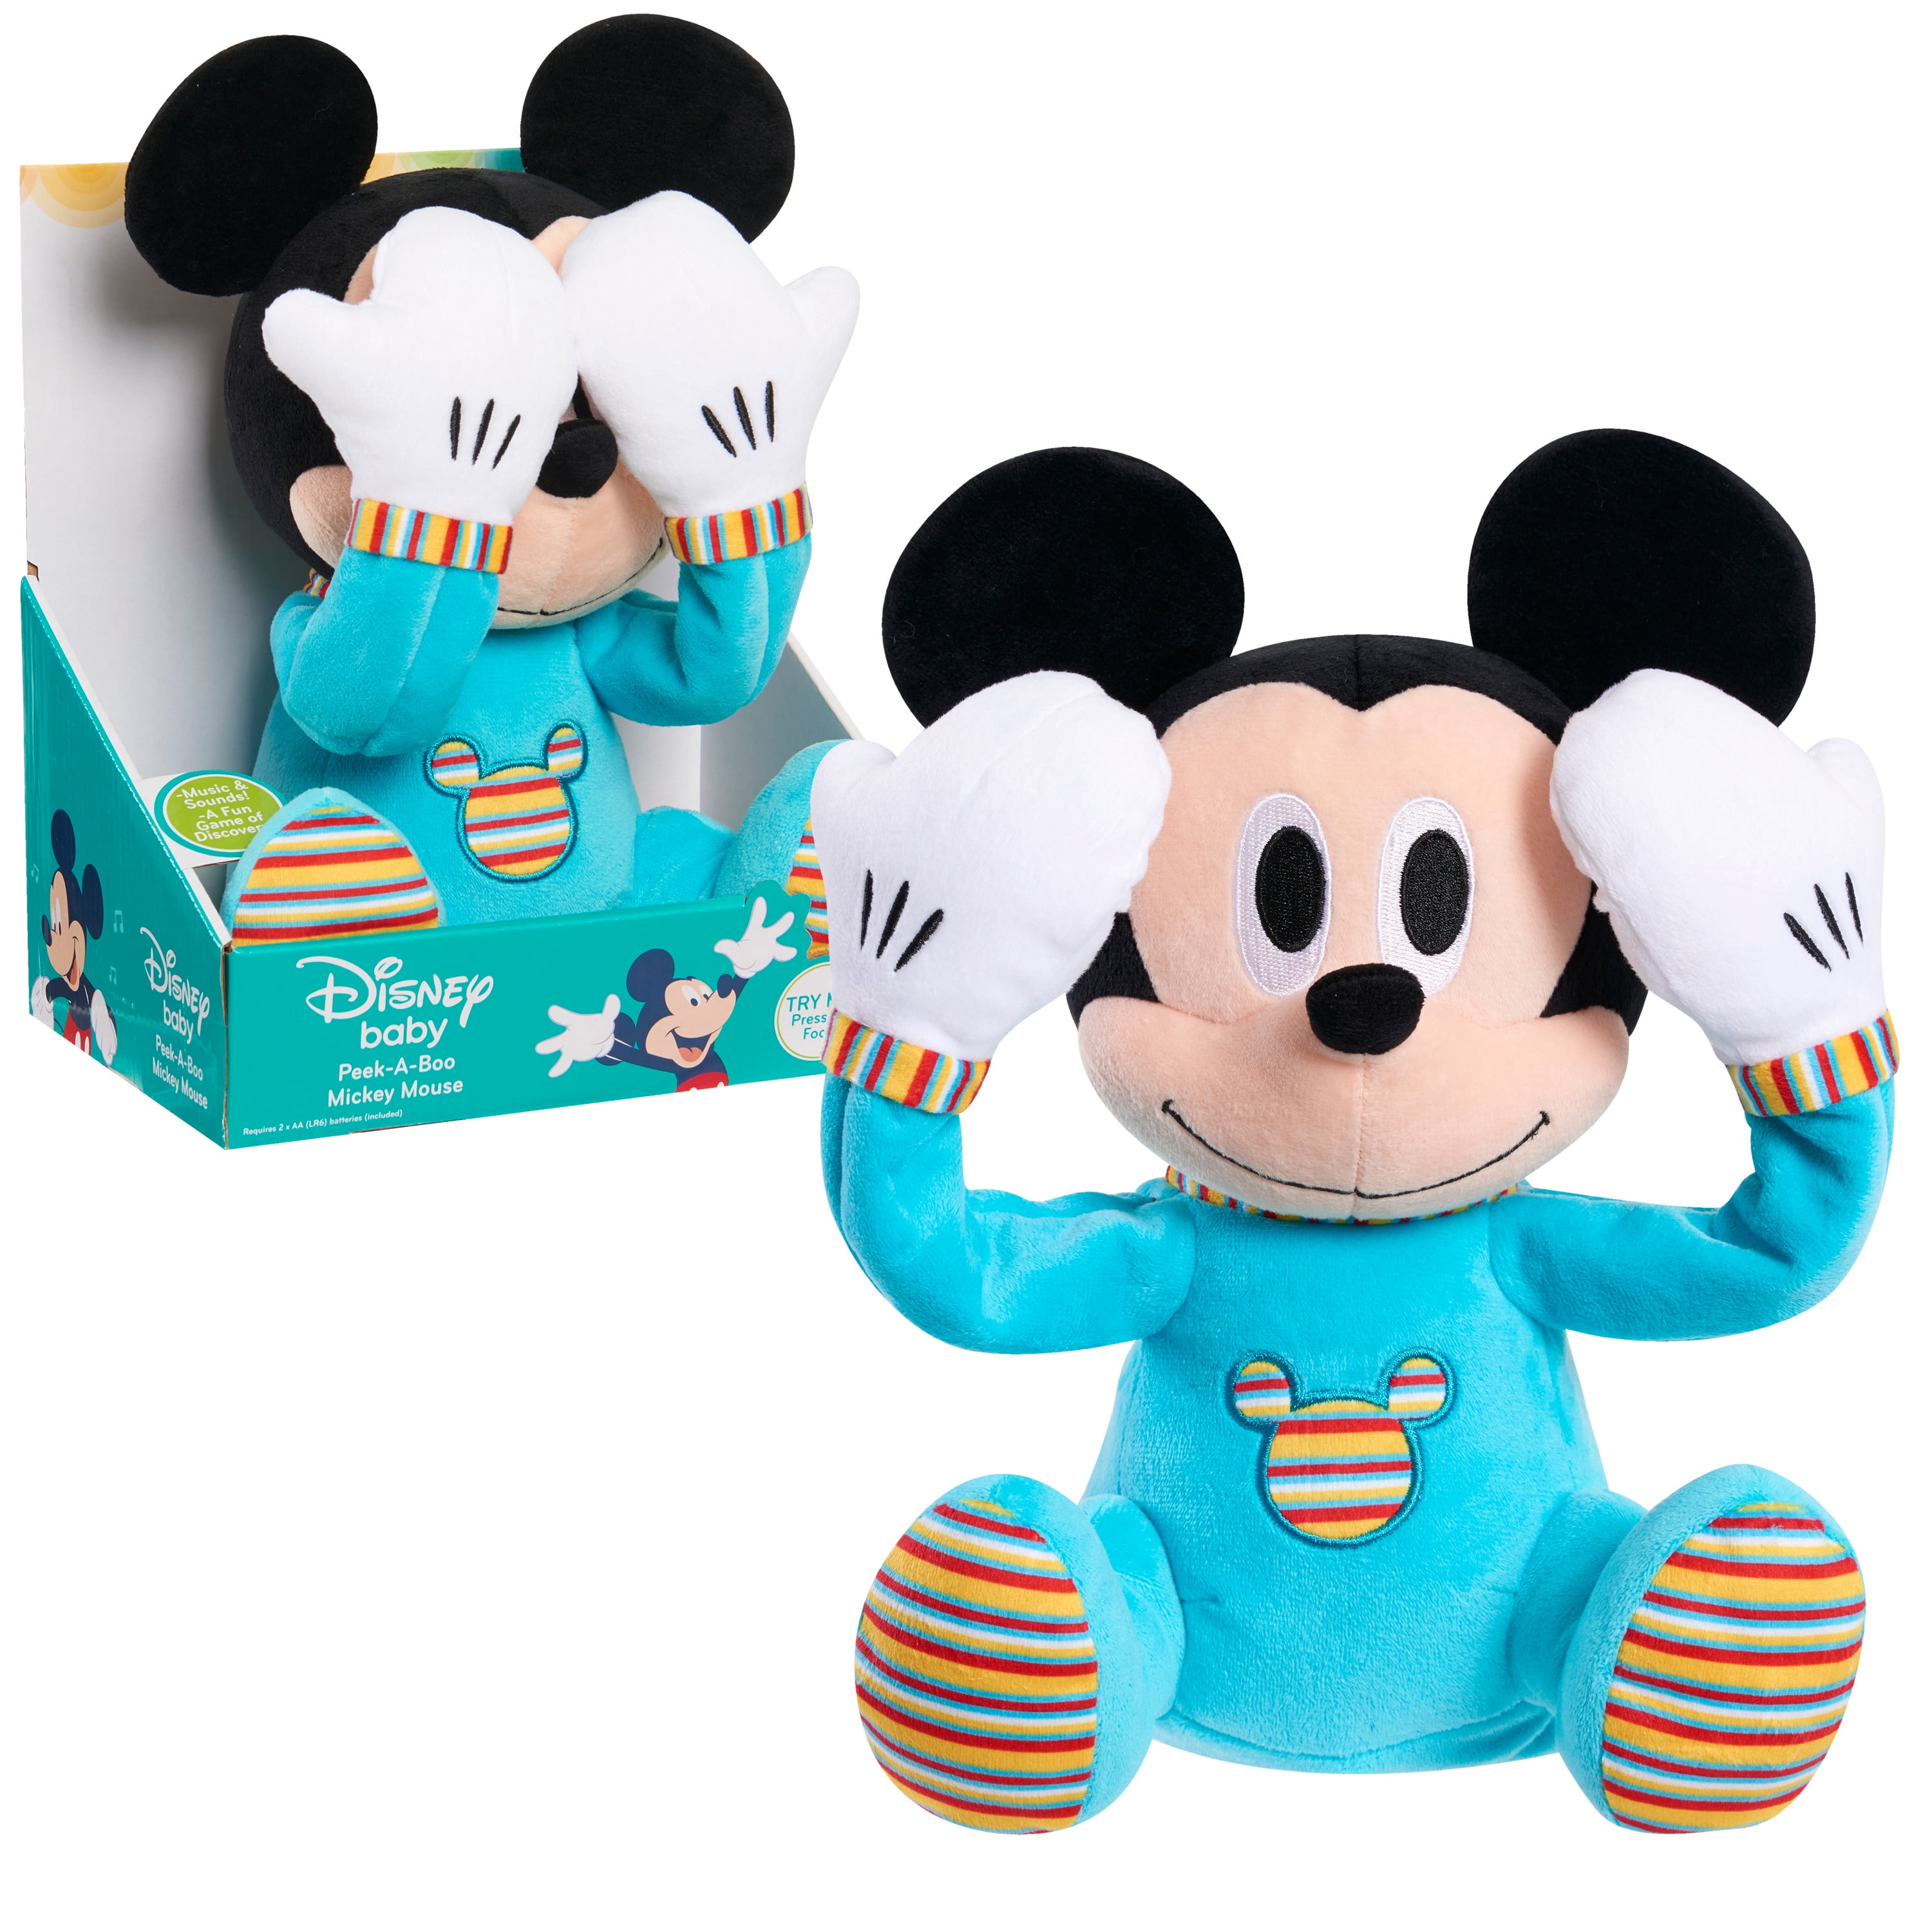 Disney Baby Peek-A-Boo Plush, Mickey Mouse, Officially Licensed Kids Toys  for Ages 09 Month, Gifts and Presents